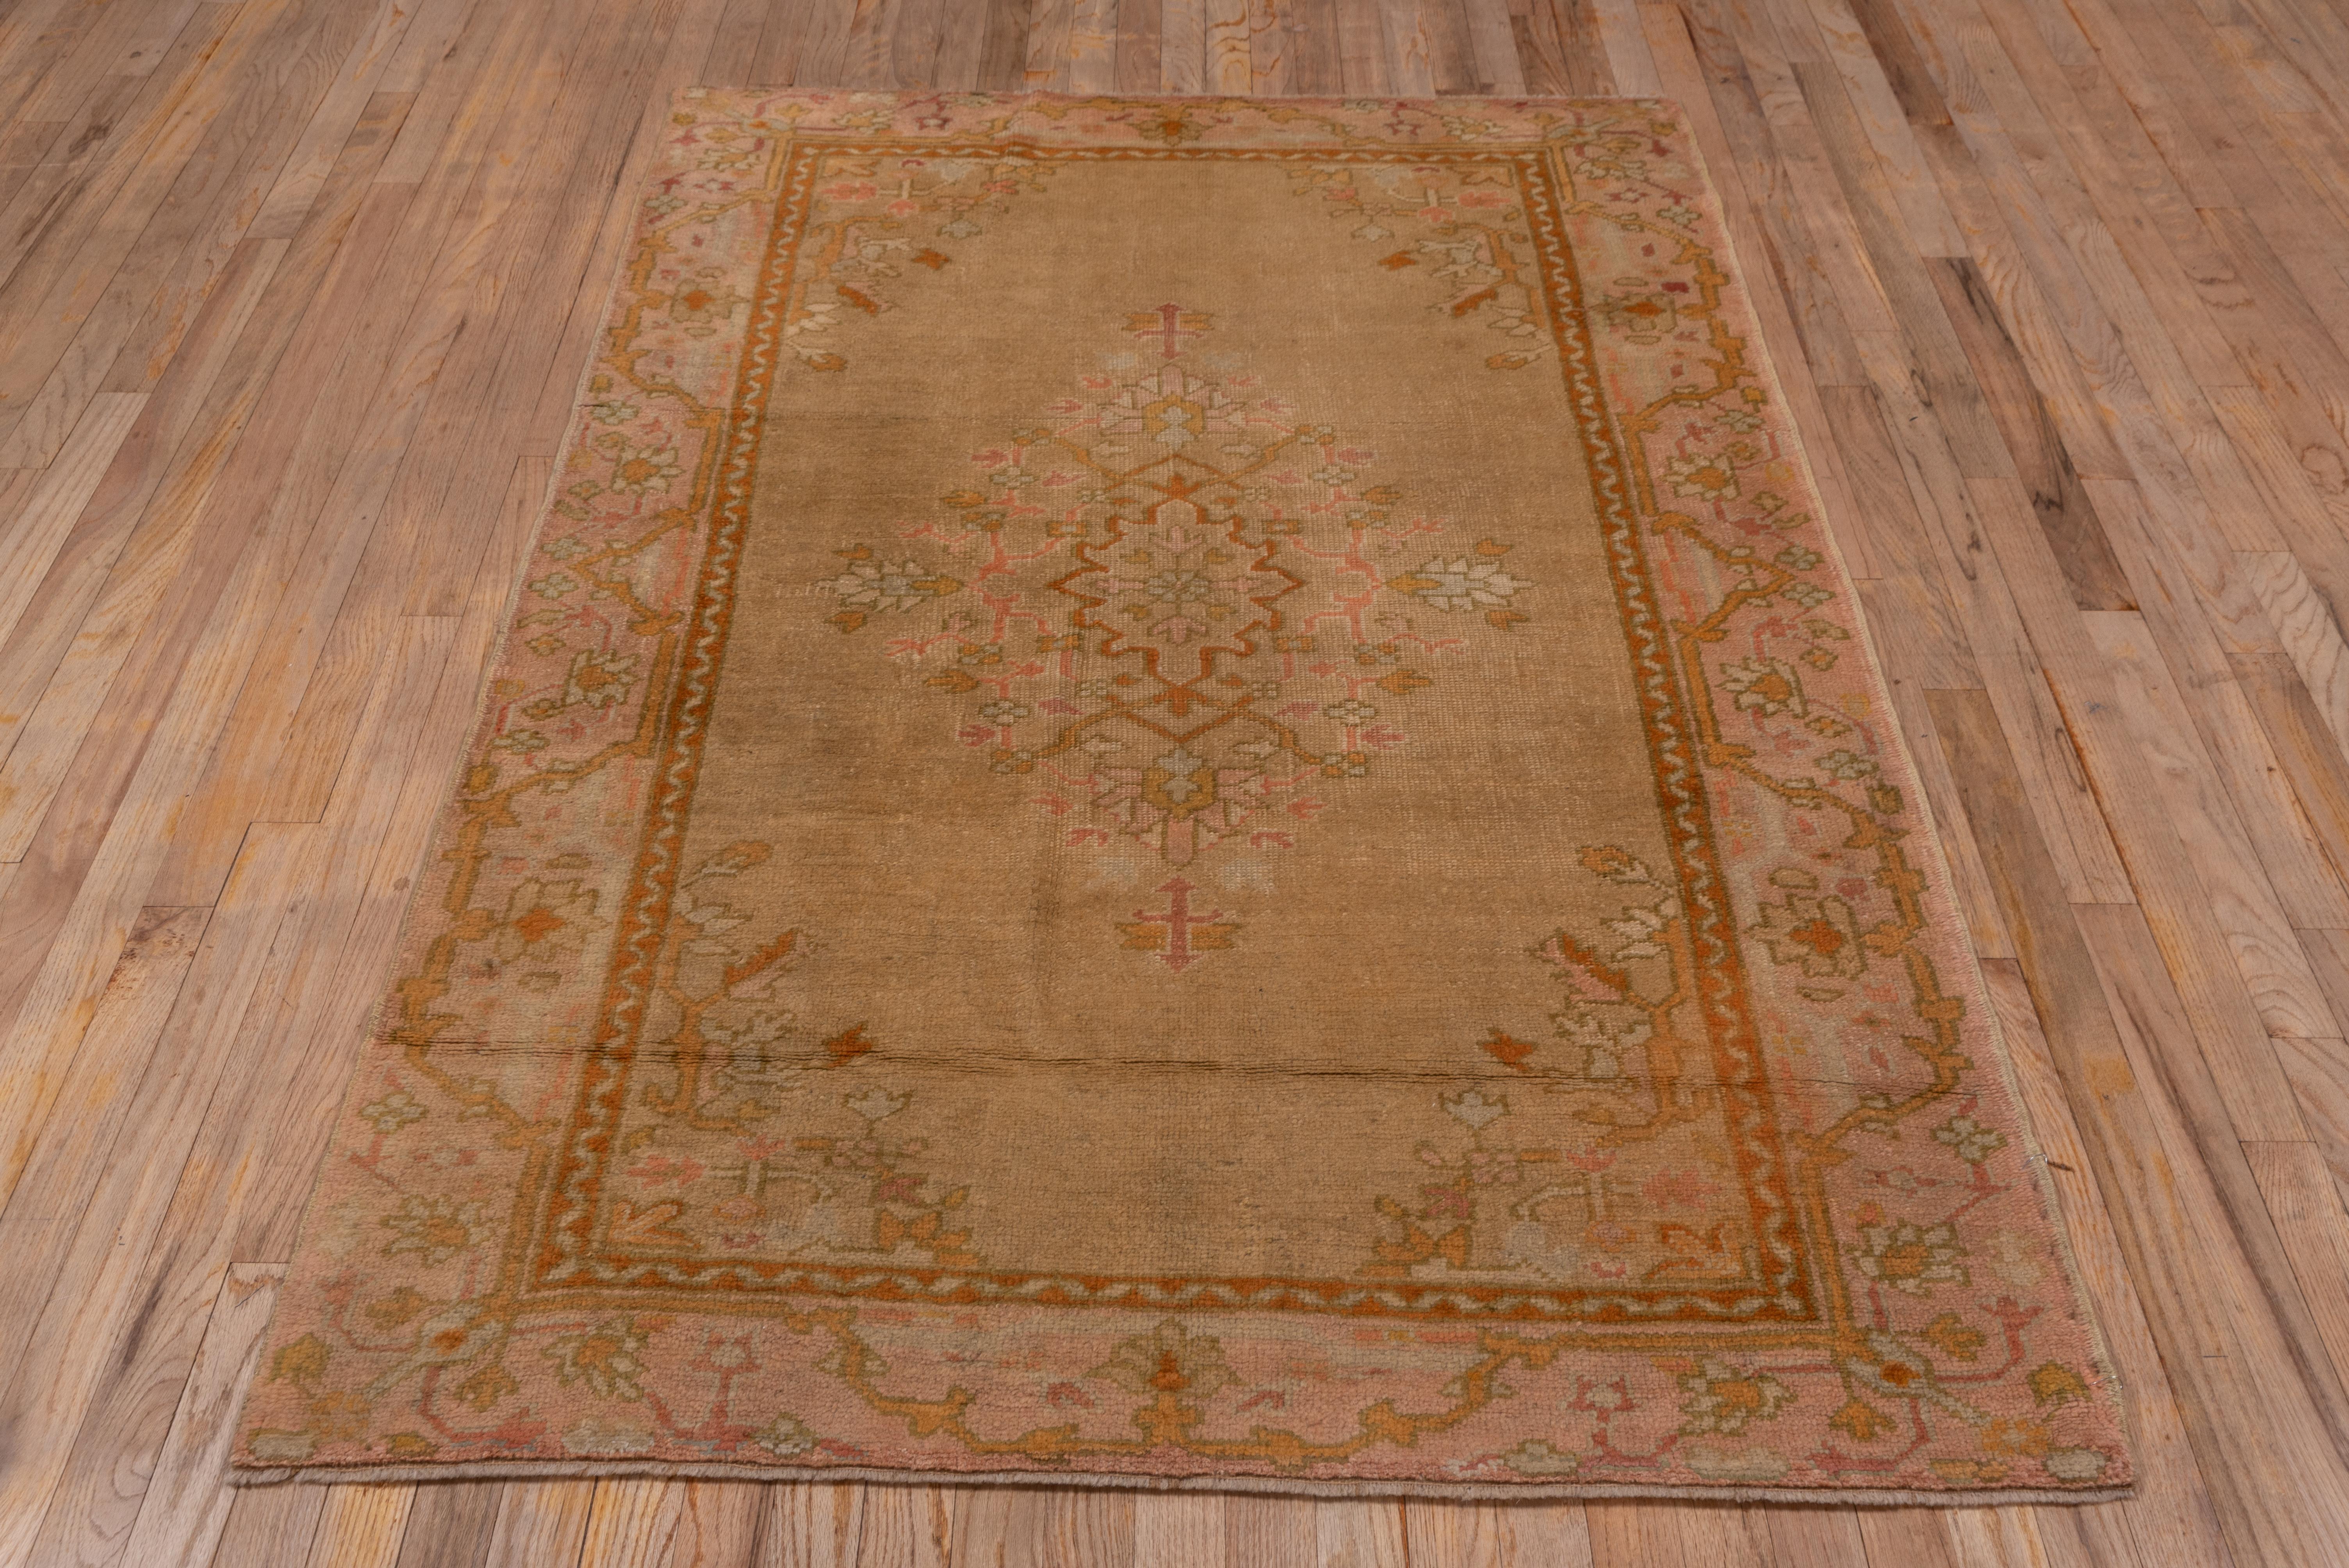 This western Turkish workshop rug shows a rust and goldenrod detailed ragged and palmette layered medallion on the golden beige open ground with leaf and stem corners. The tonally en suite border displays a stretched meander and palmettes.